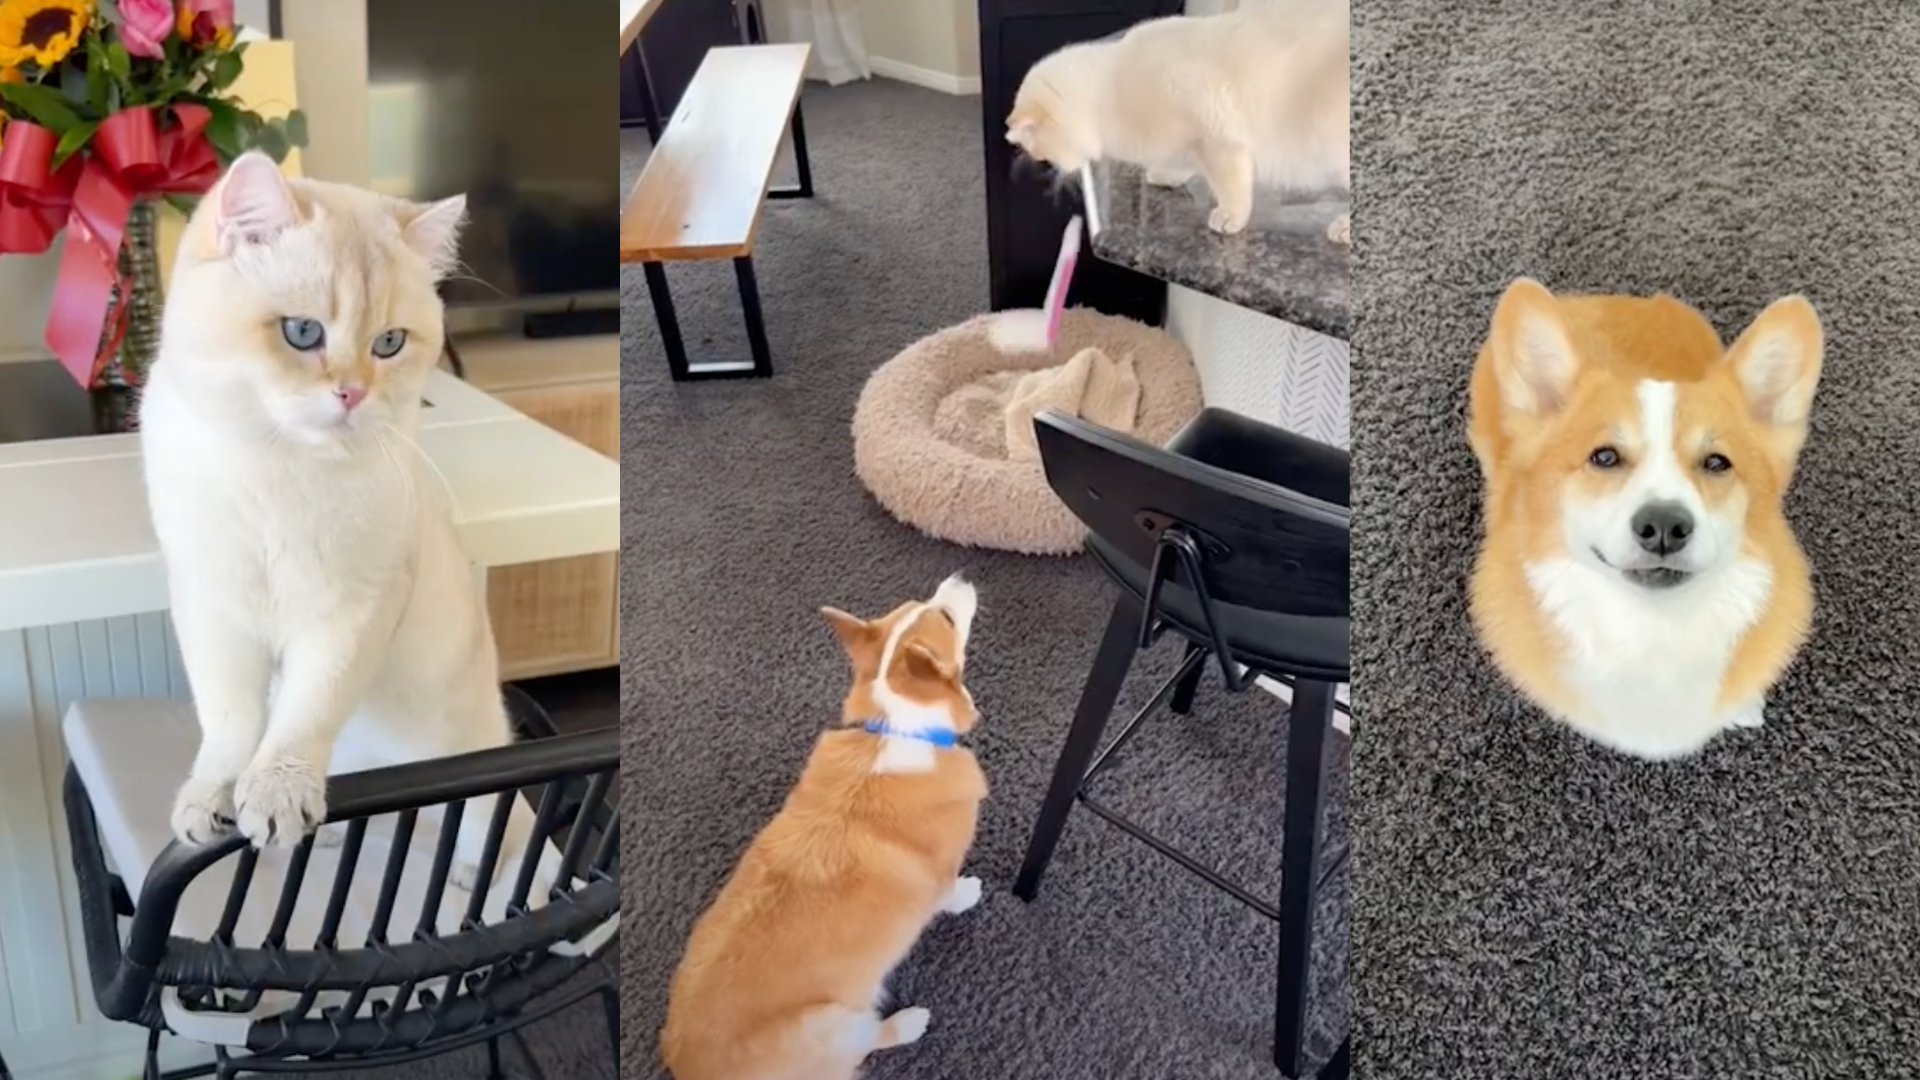 Cat and dog go viral for their (impressive) teamwork thievery